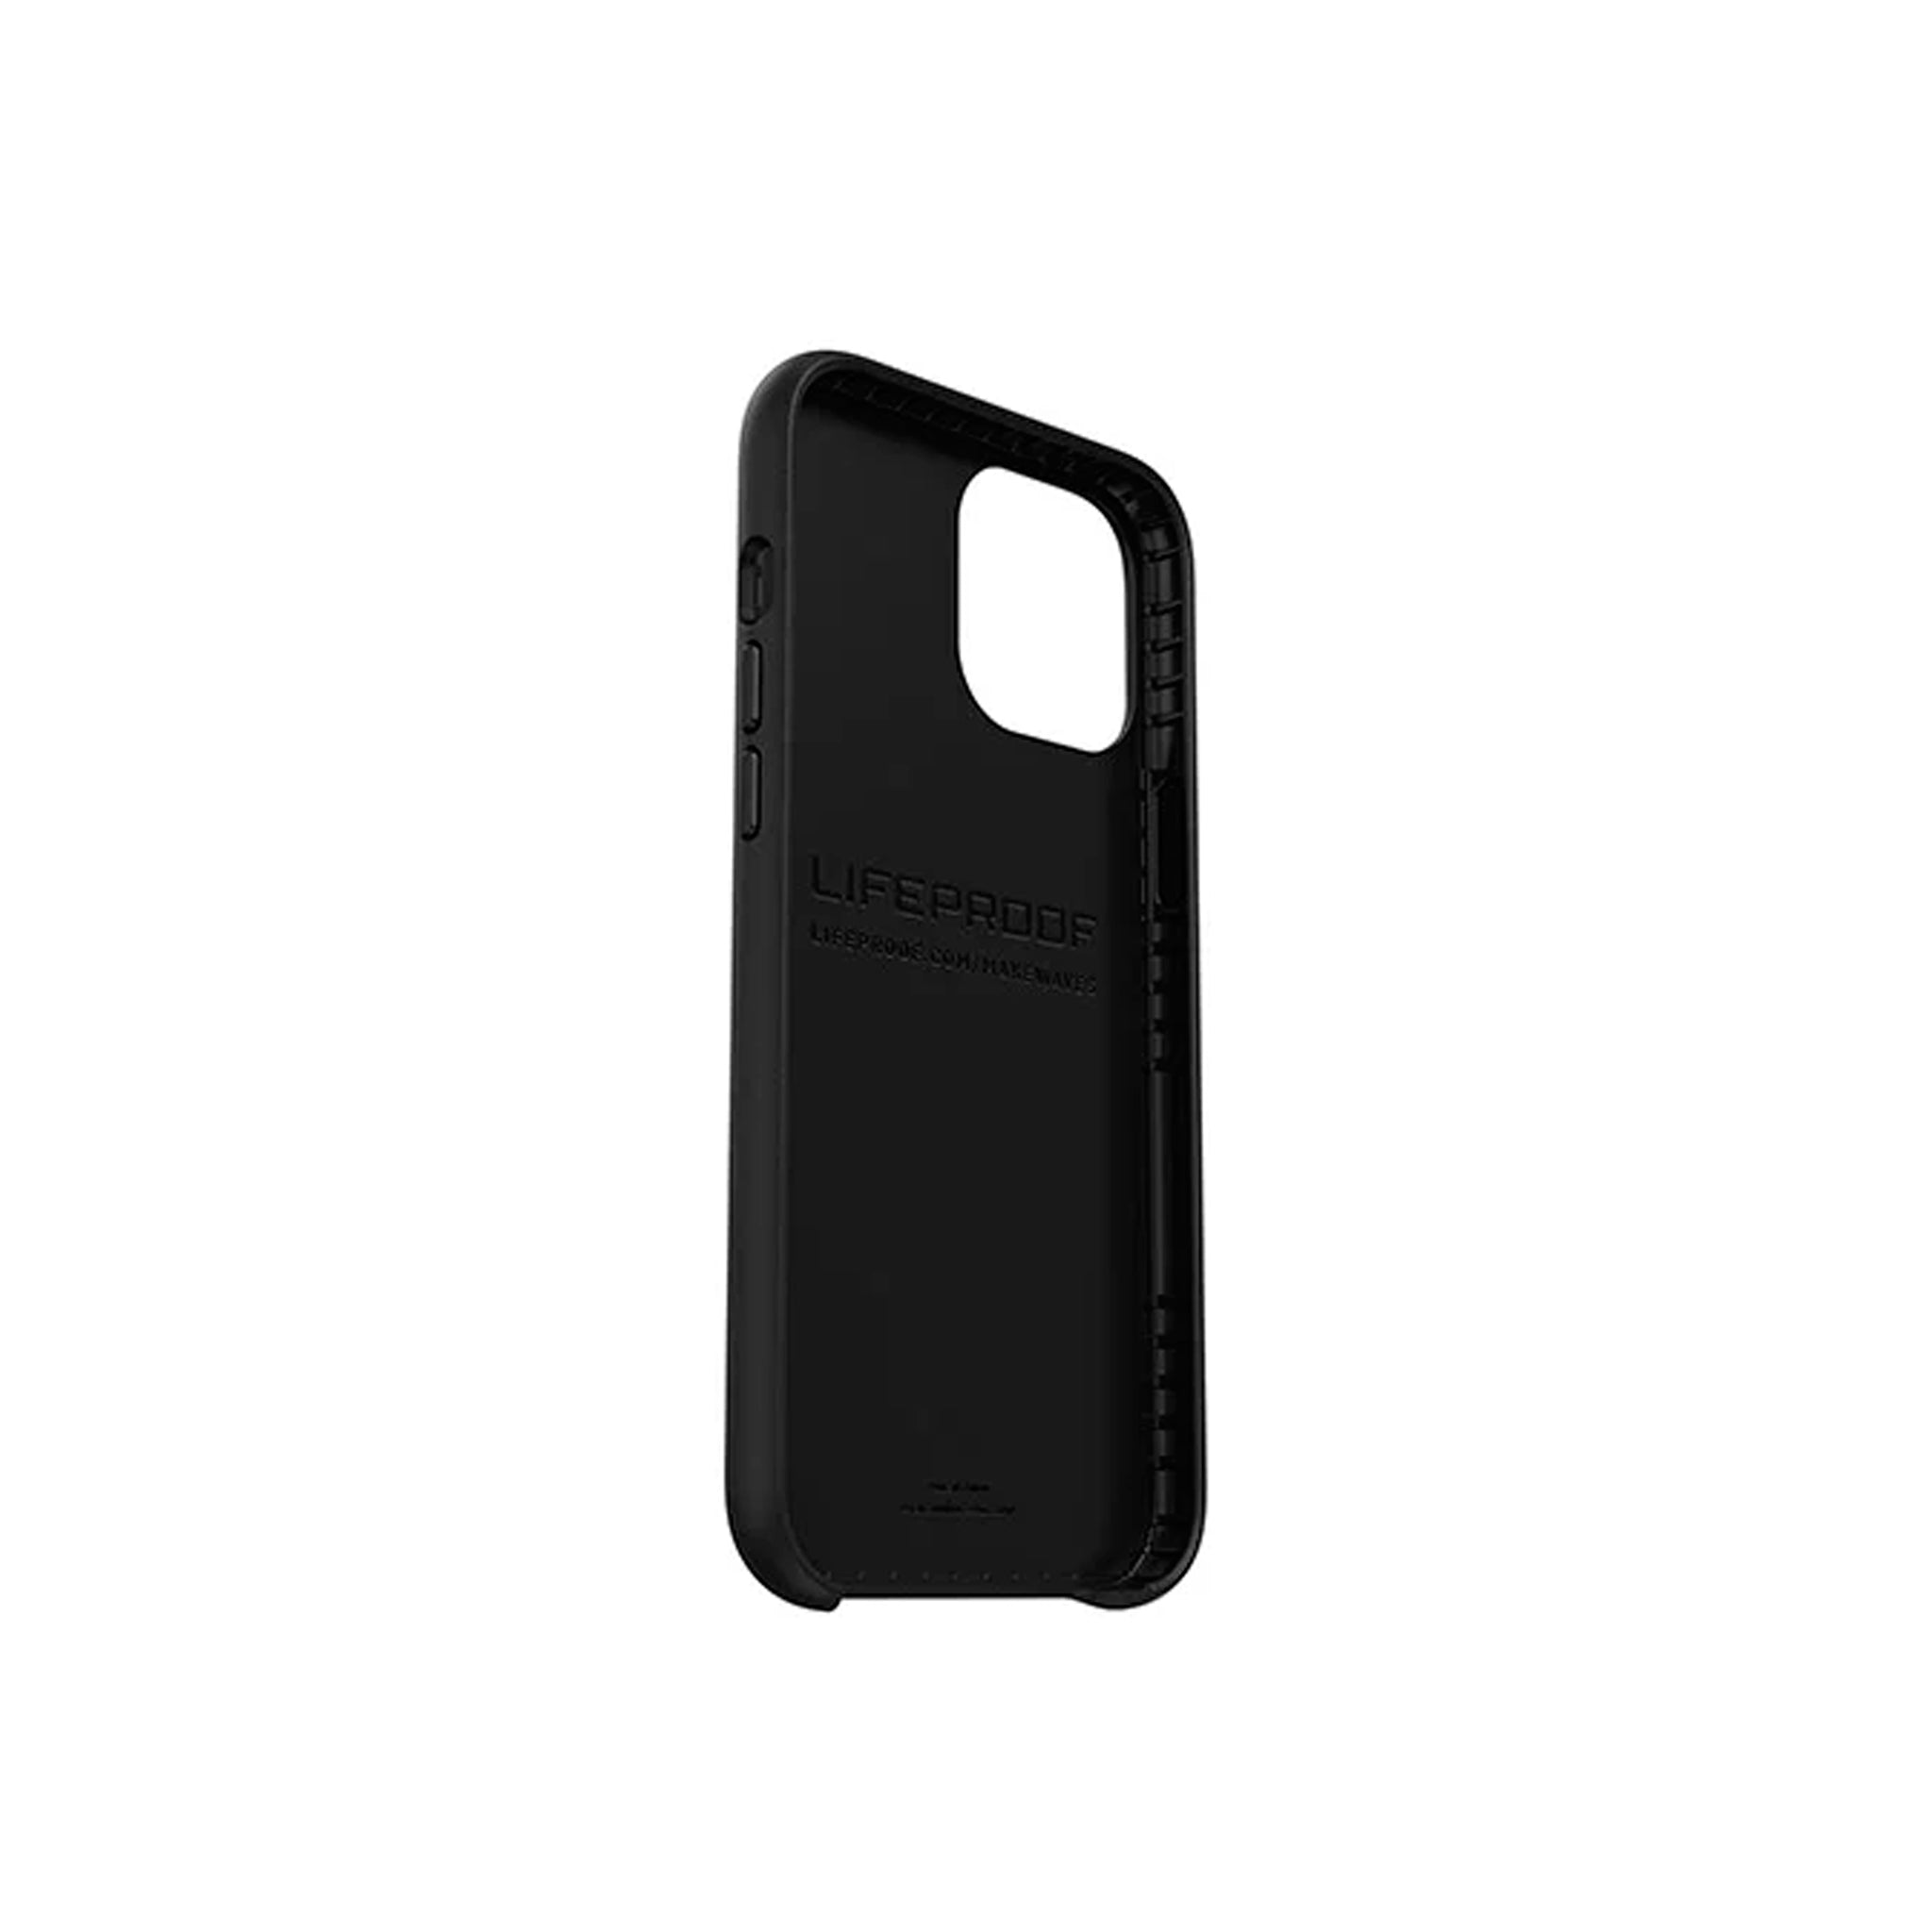 LifeProof - Wake for iPhone 12 Pro Max - Black